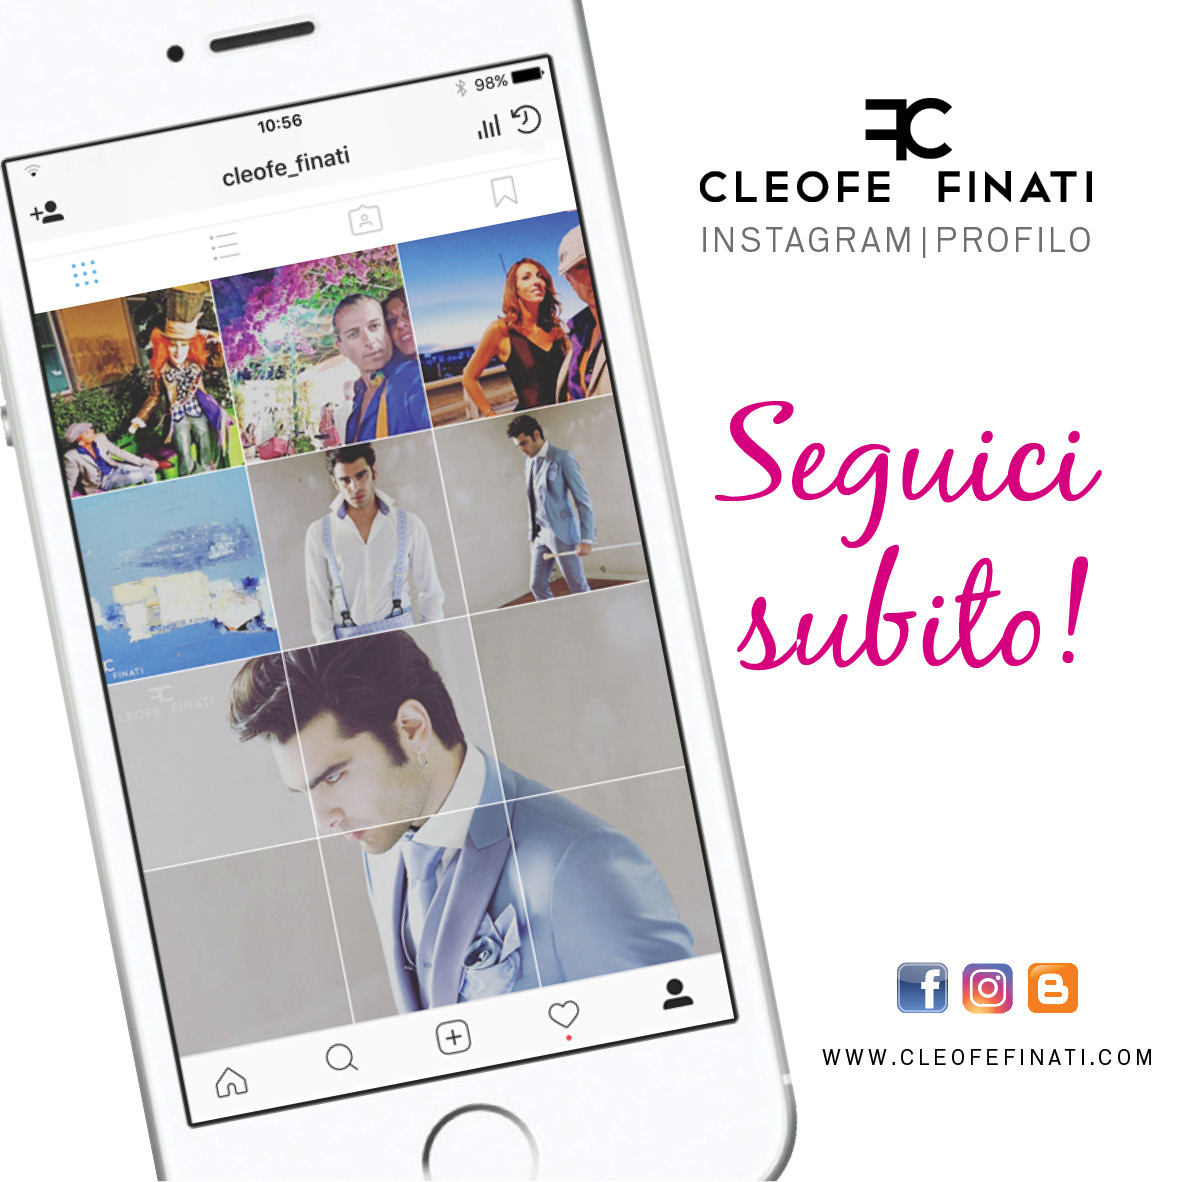 The success of Cleofe Finati on social networks